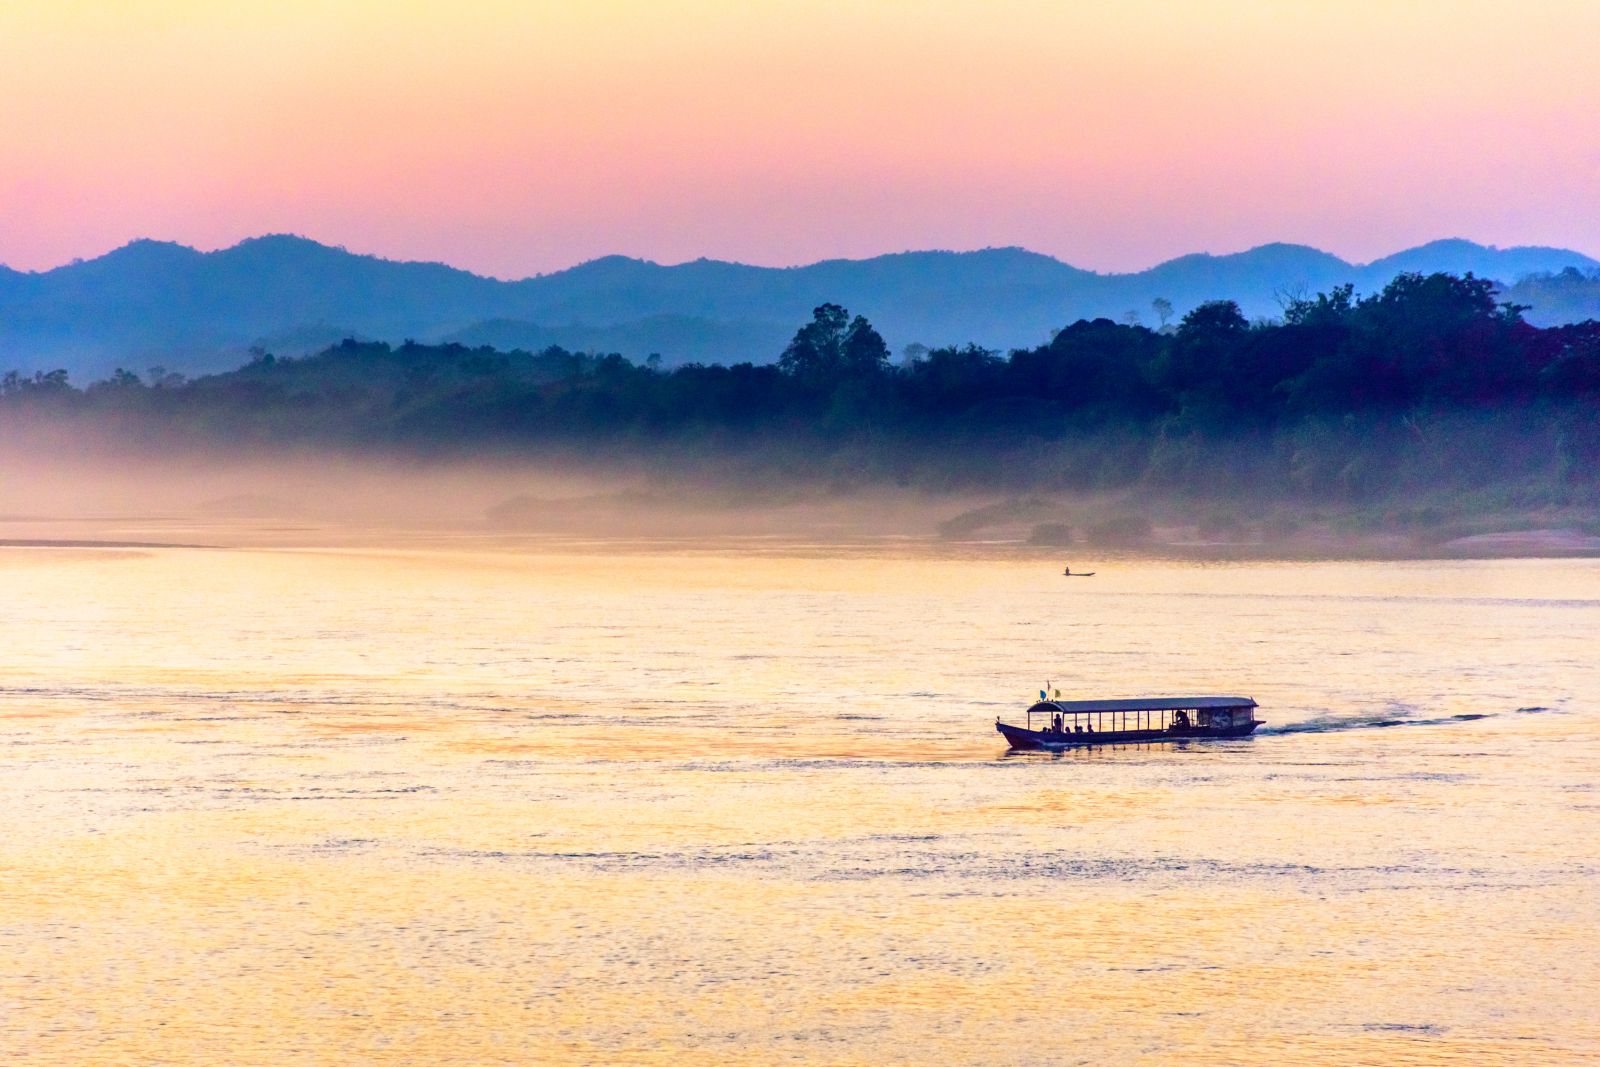 A boat crusing the Mekong River in Thailand at sunset